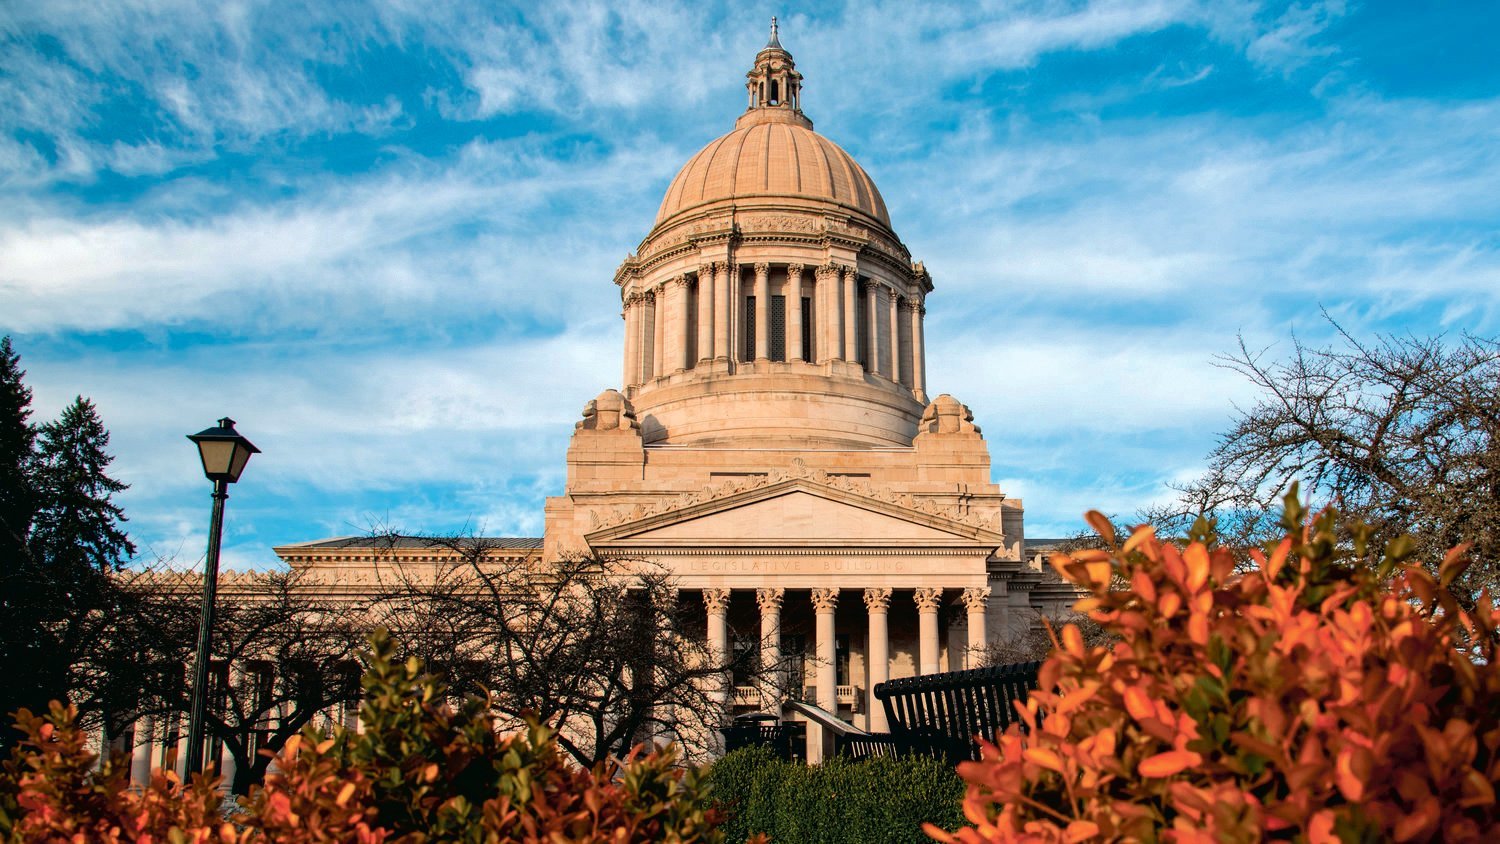 The Washington State Capitol building is pictured.